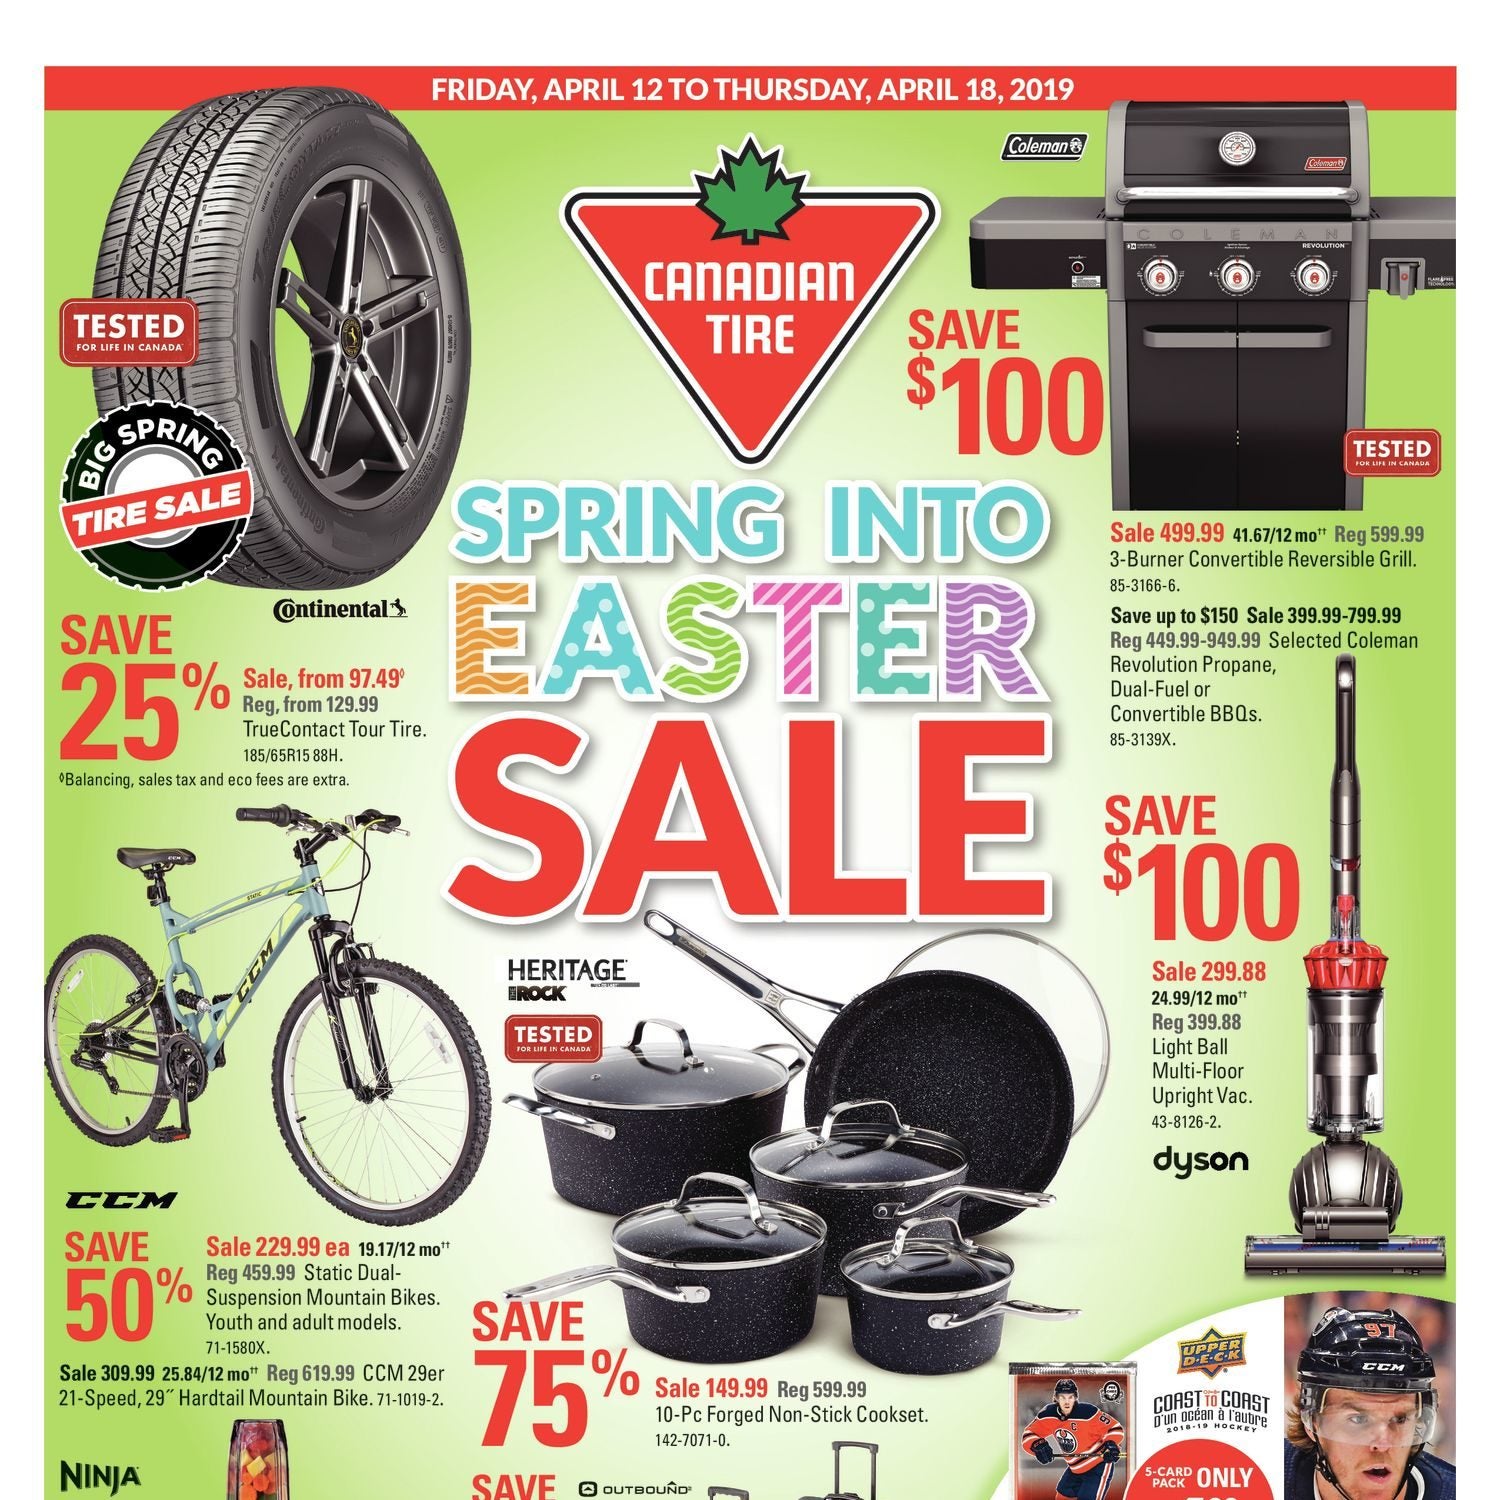 Canadian Tire Weekly Flyer Weekly Spring Into Easter Sale